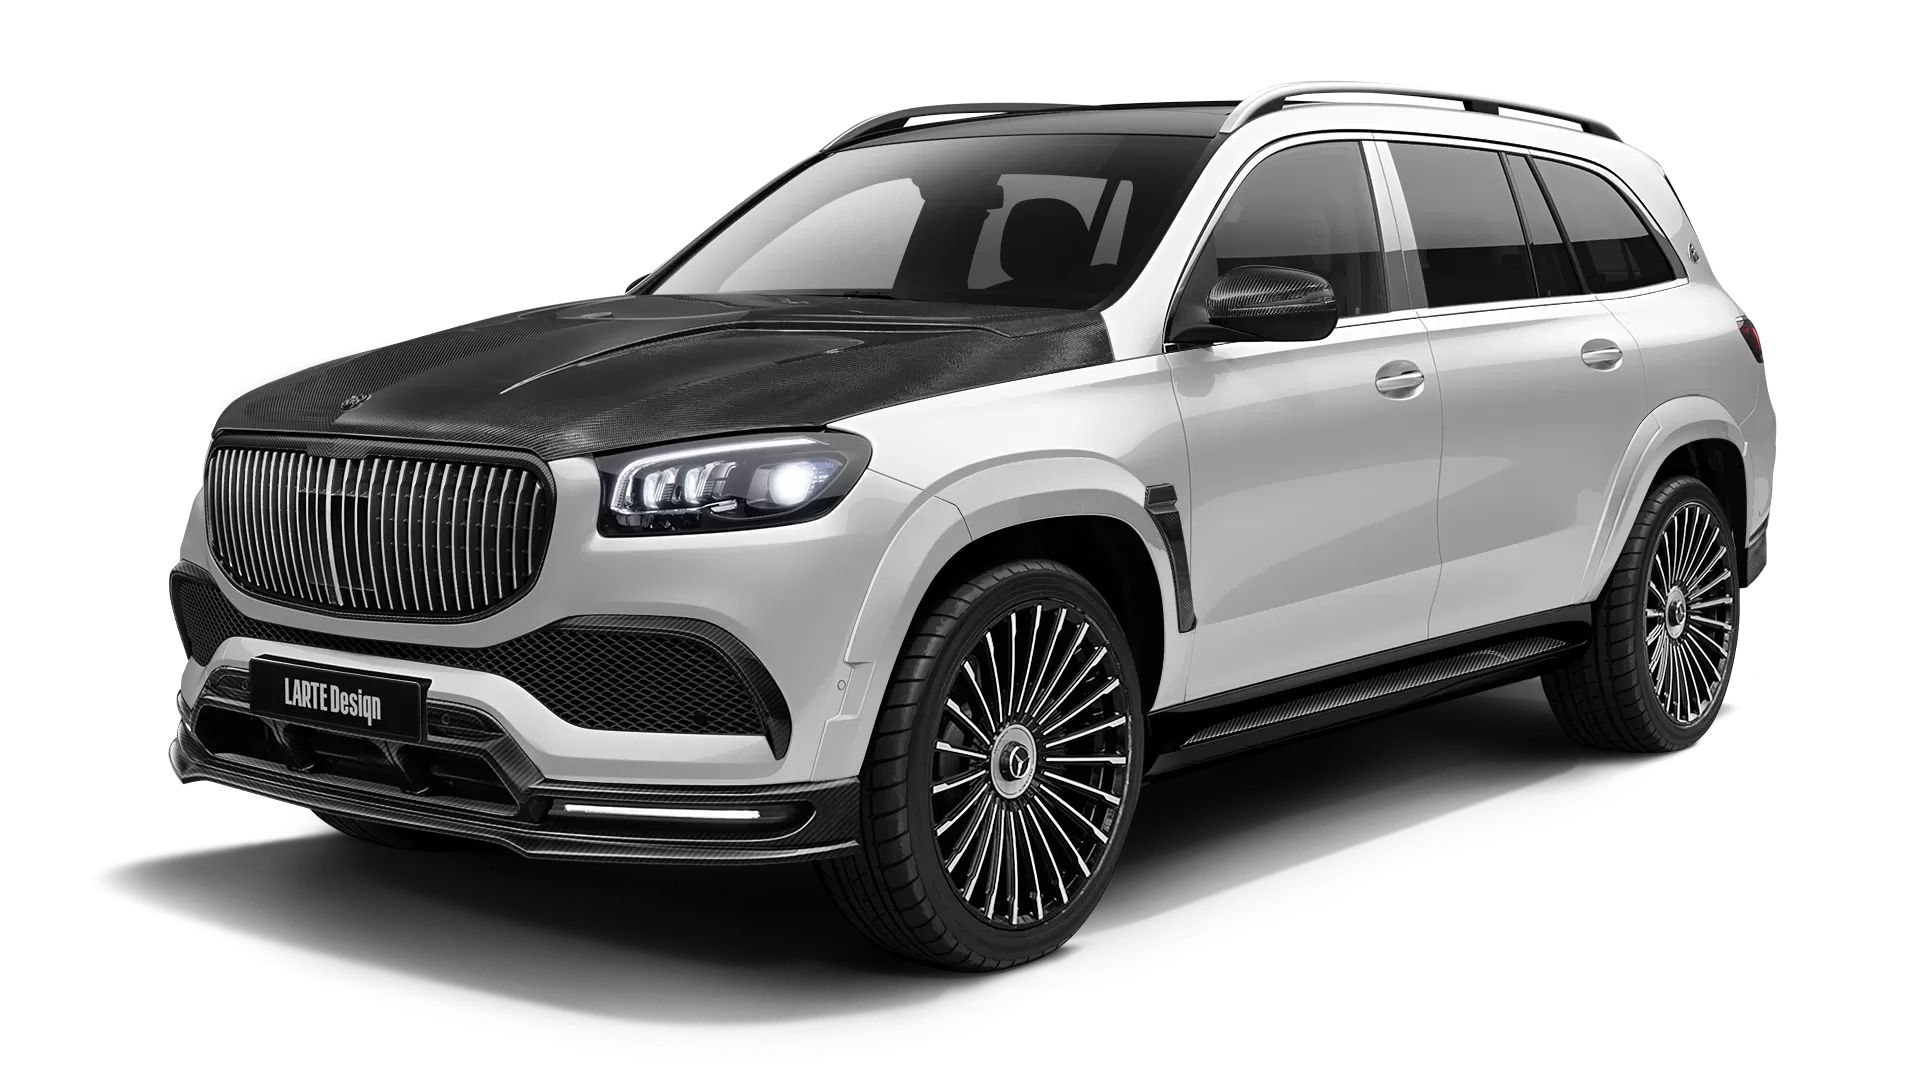 Mercedes Maybach GLS 600 with carbon body kit: front view shown in Diamond White